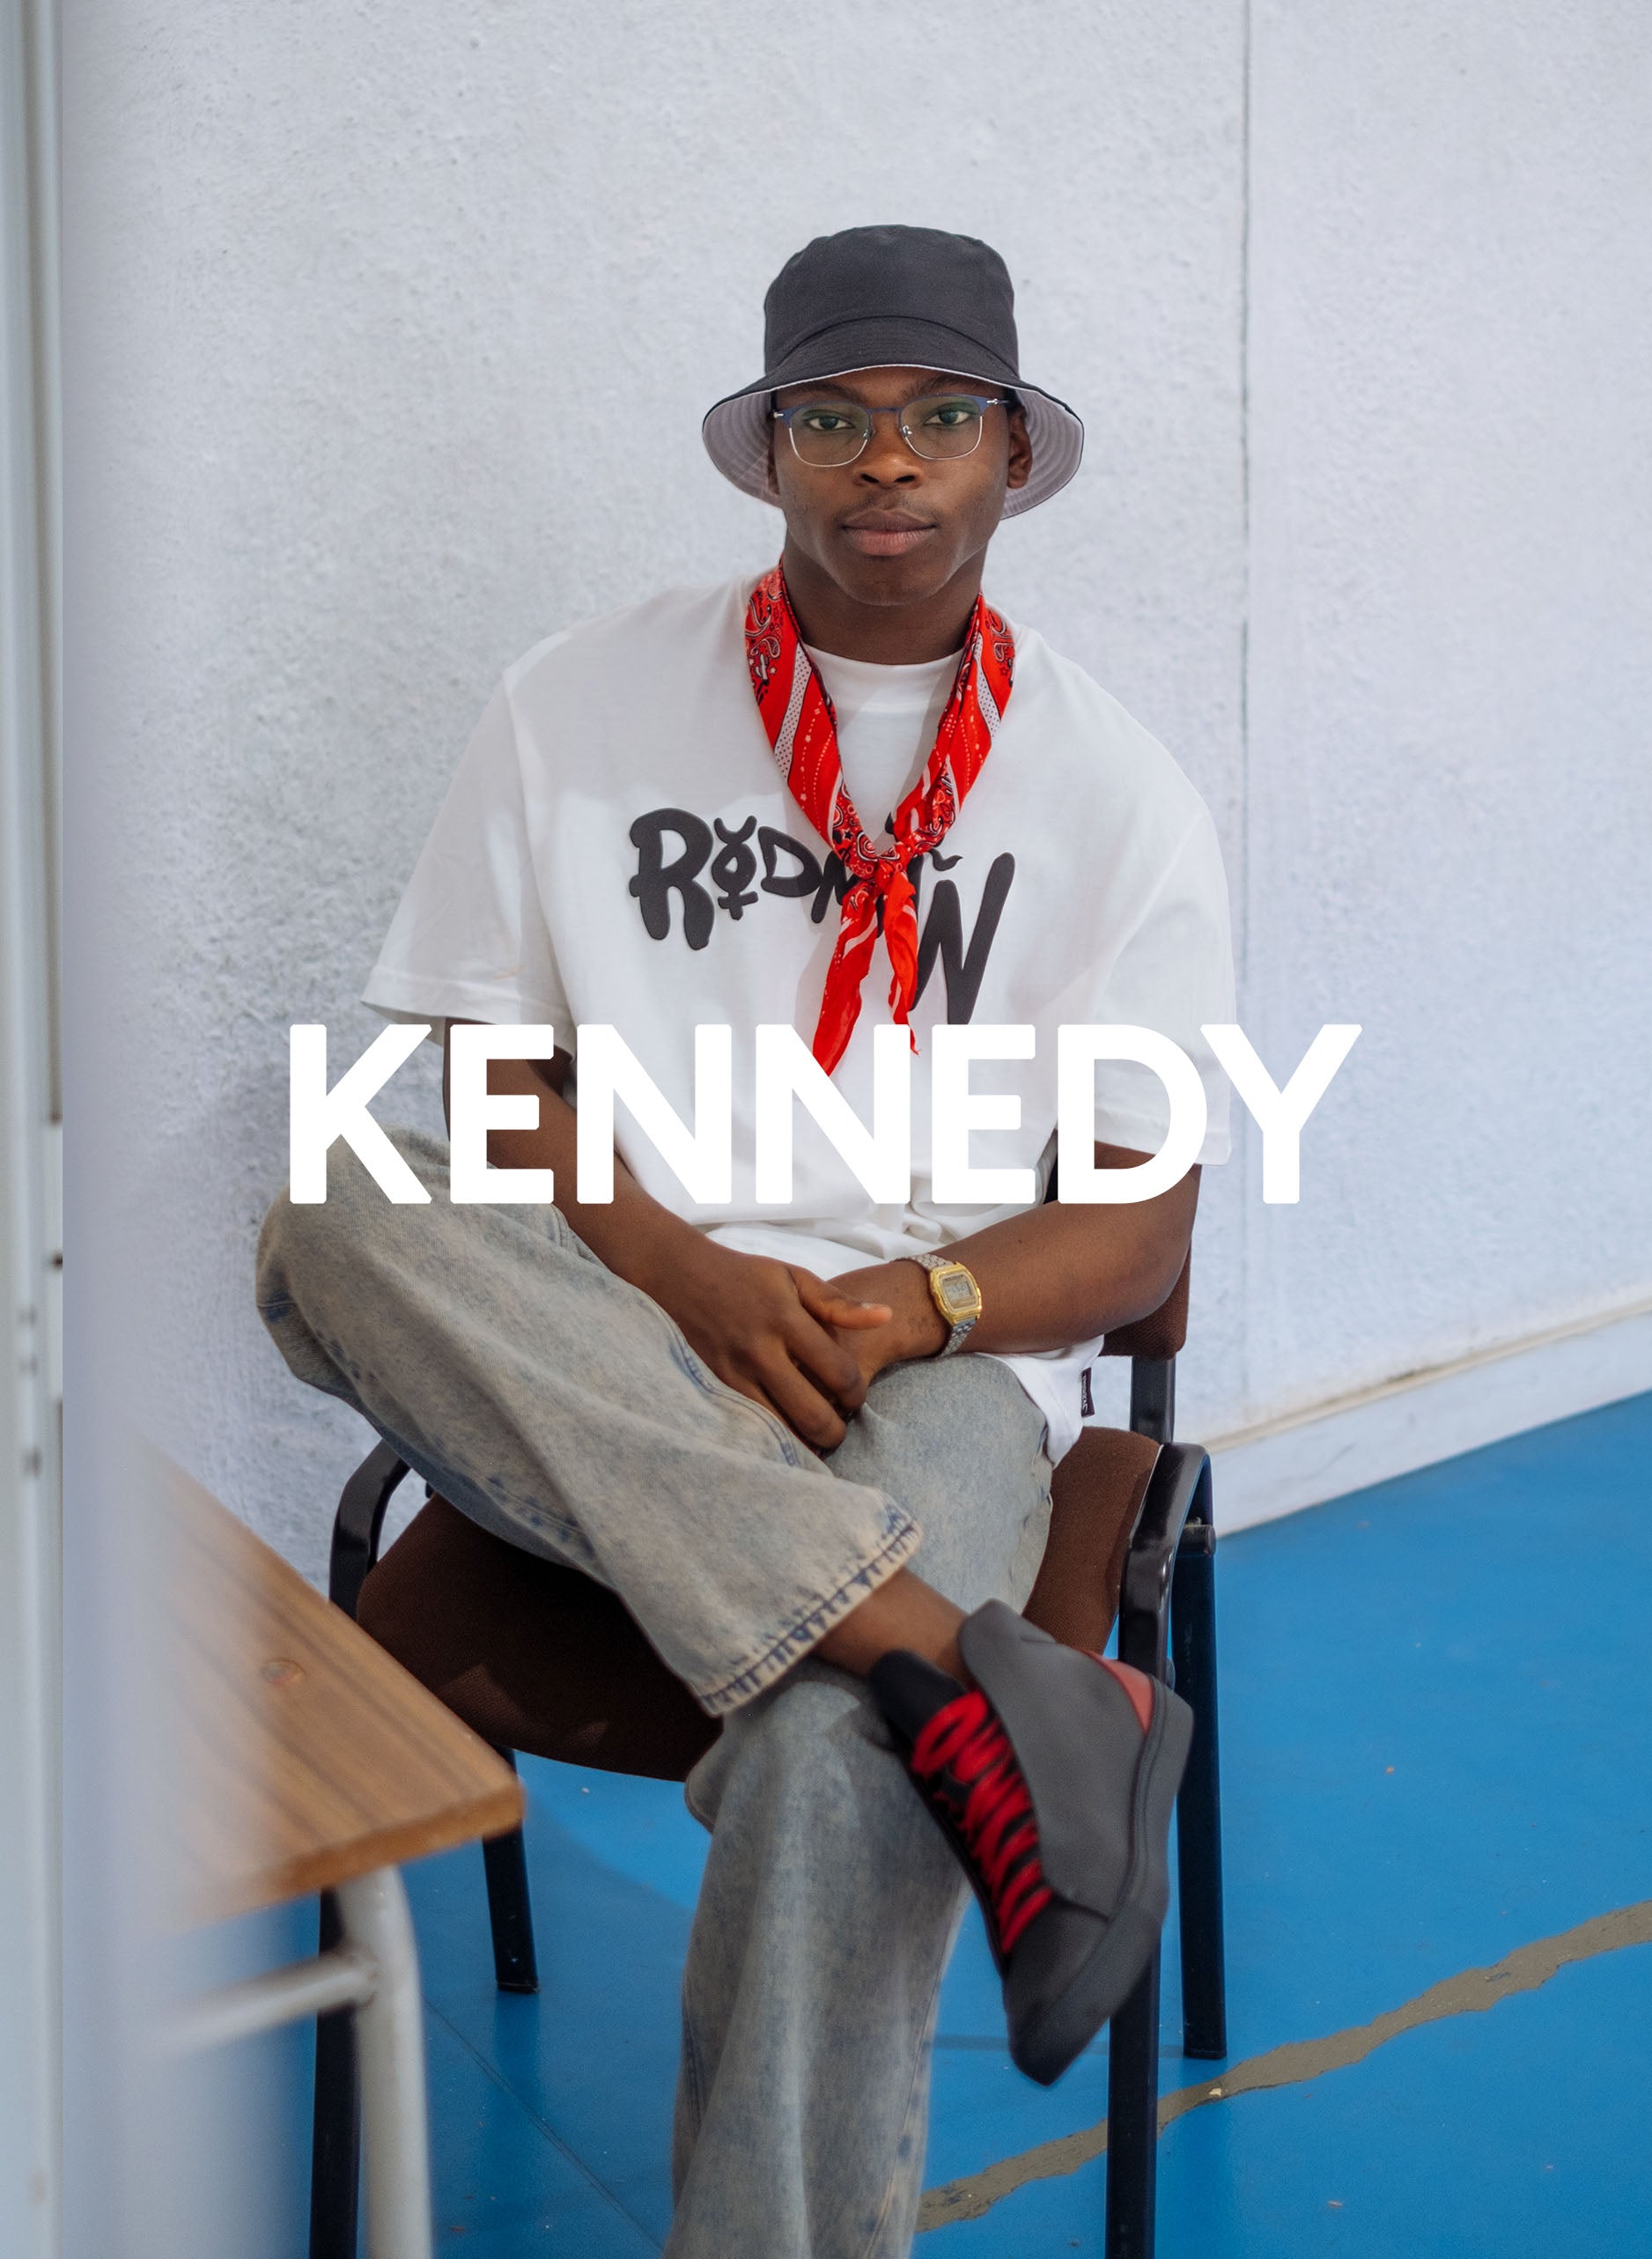 Kennedy sitting on a chair, wearing Diverge sneakers, showcasing social impact and custom shoes throught the imagine project.